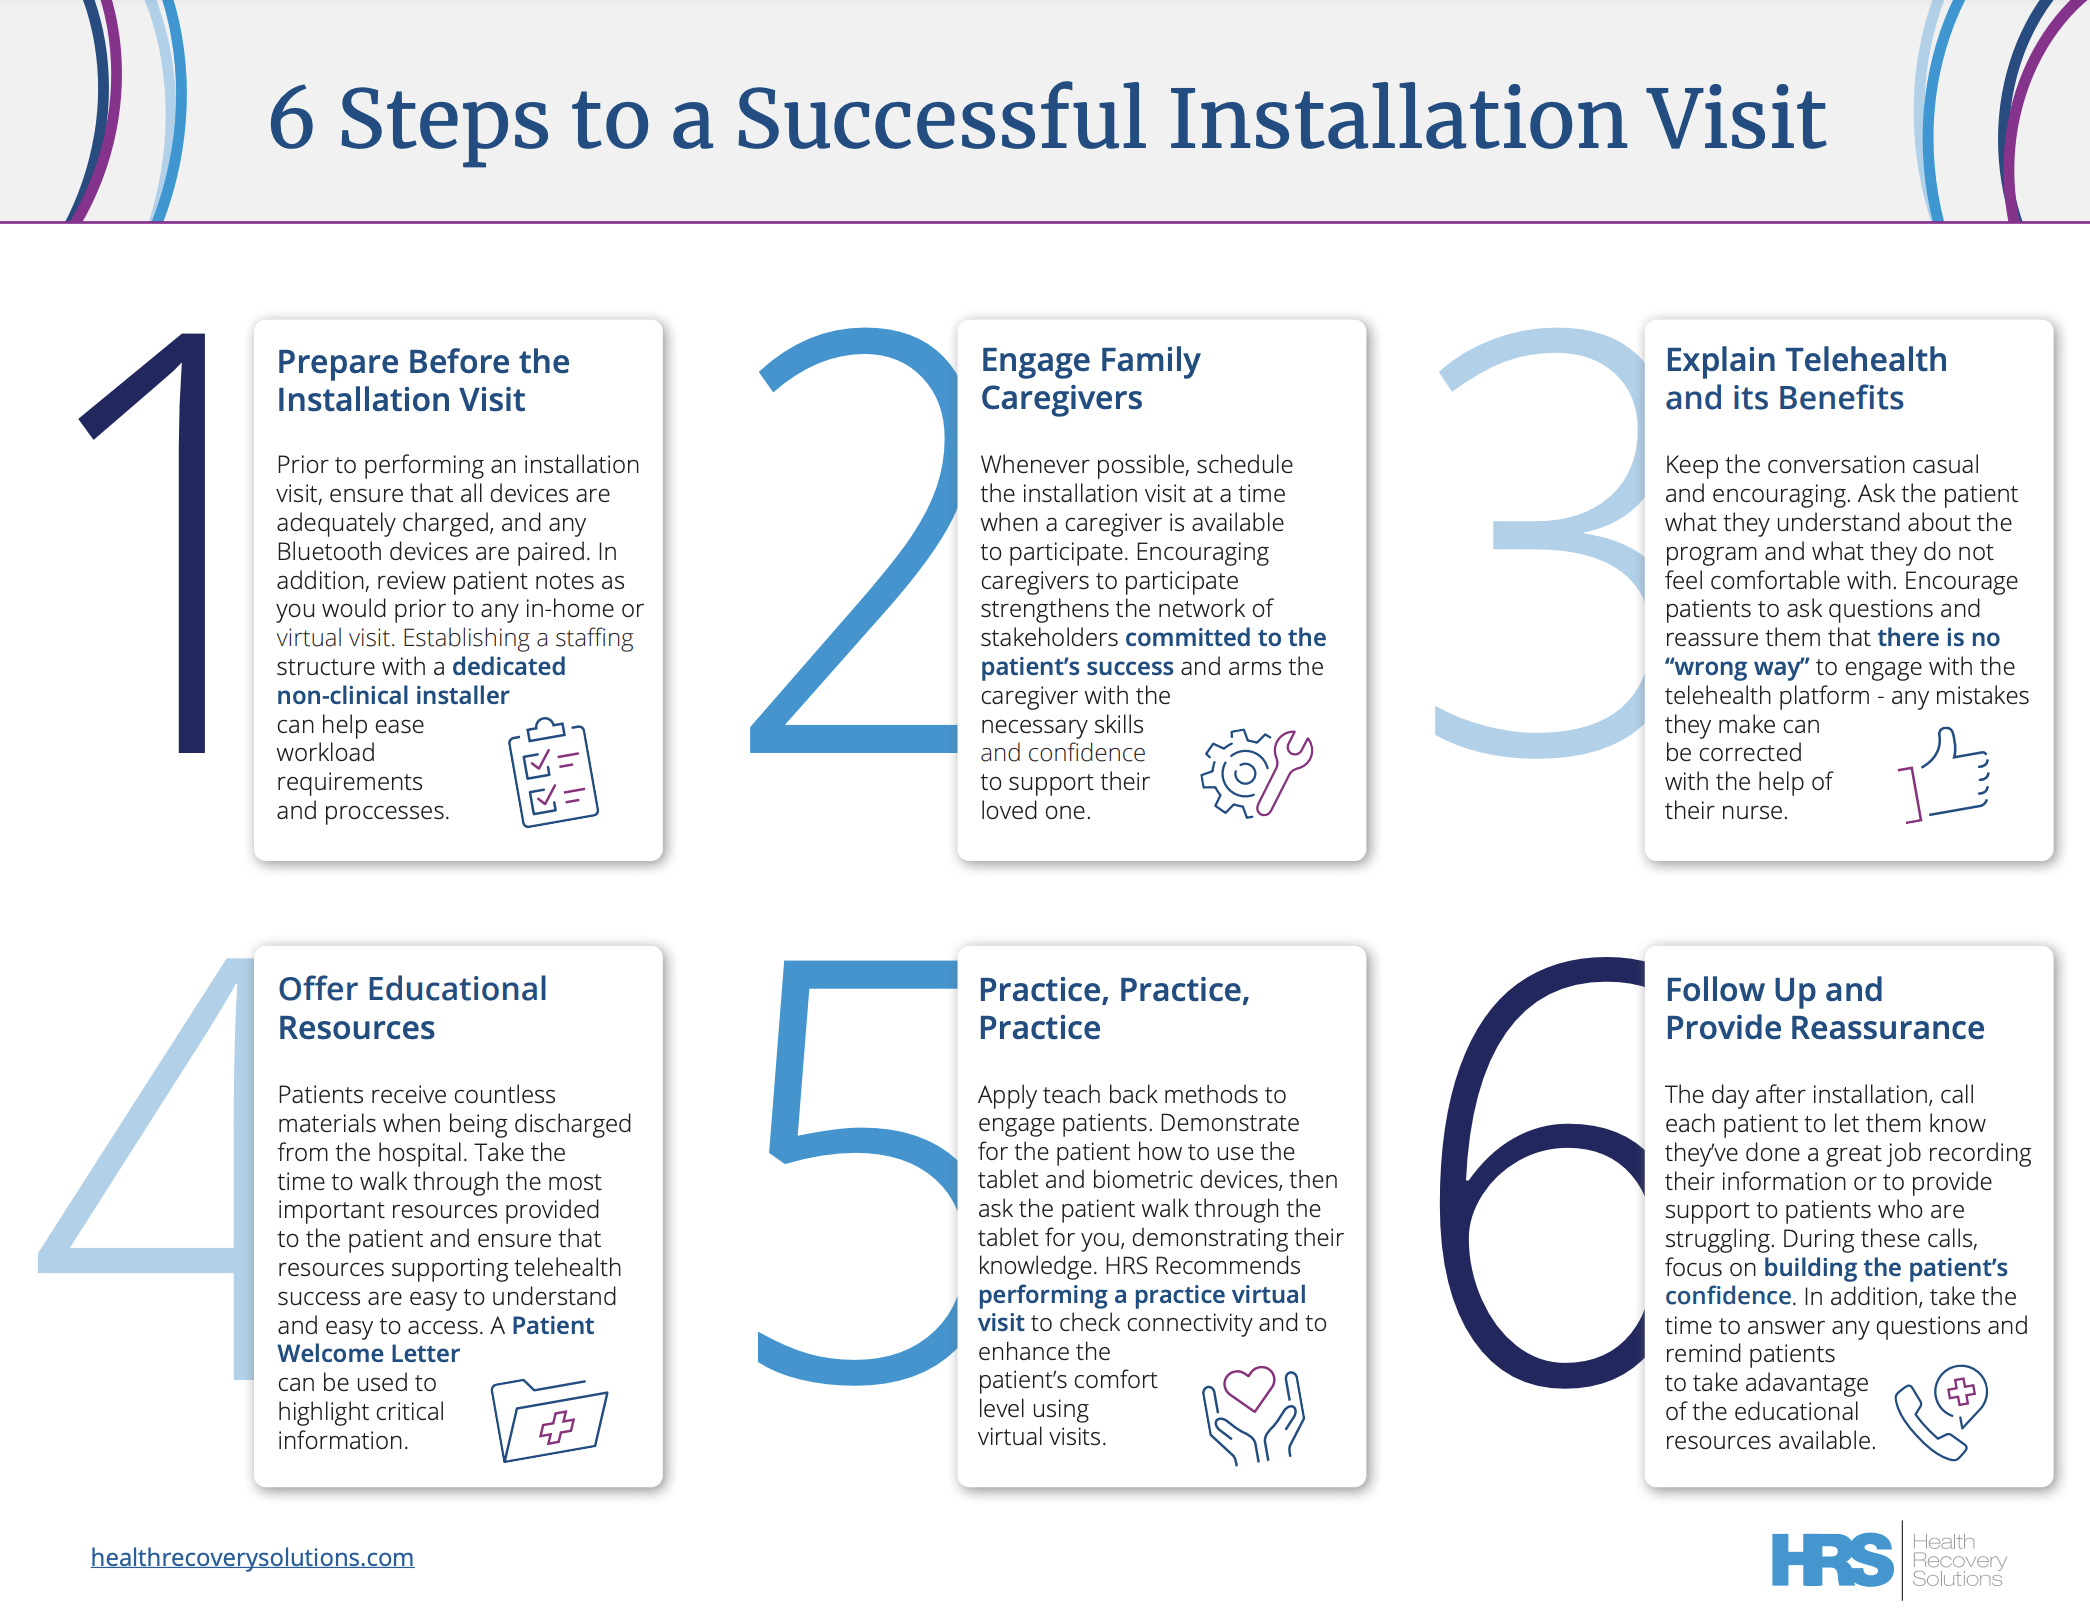 A preview of the 6 Steps to an Installation Visit quick reference guide that shows the numbers 1 through 6 with short descriptions